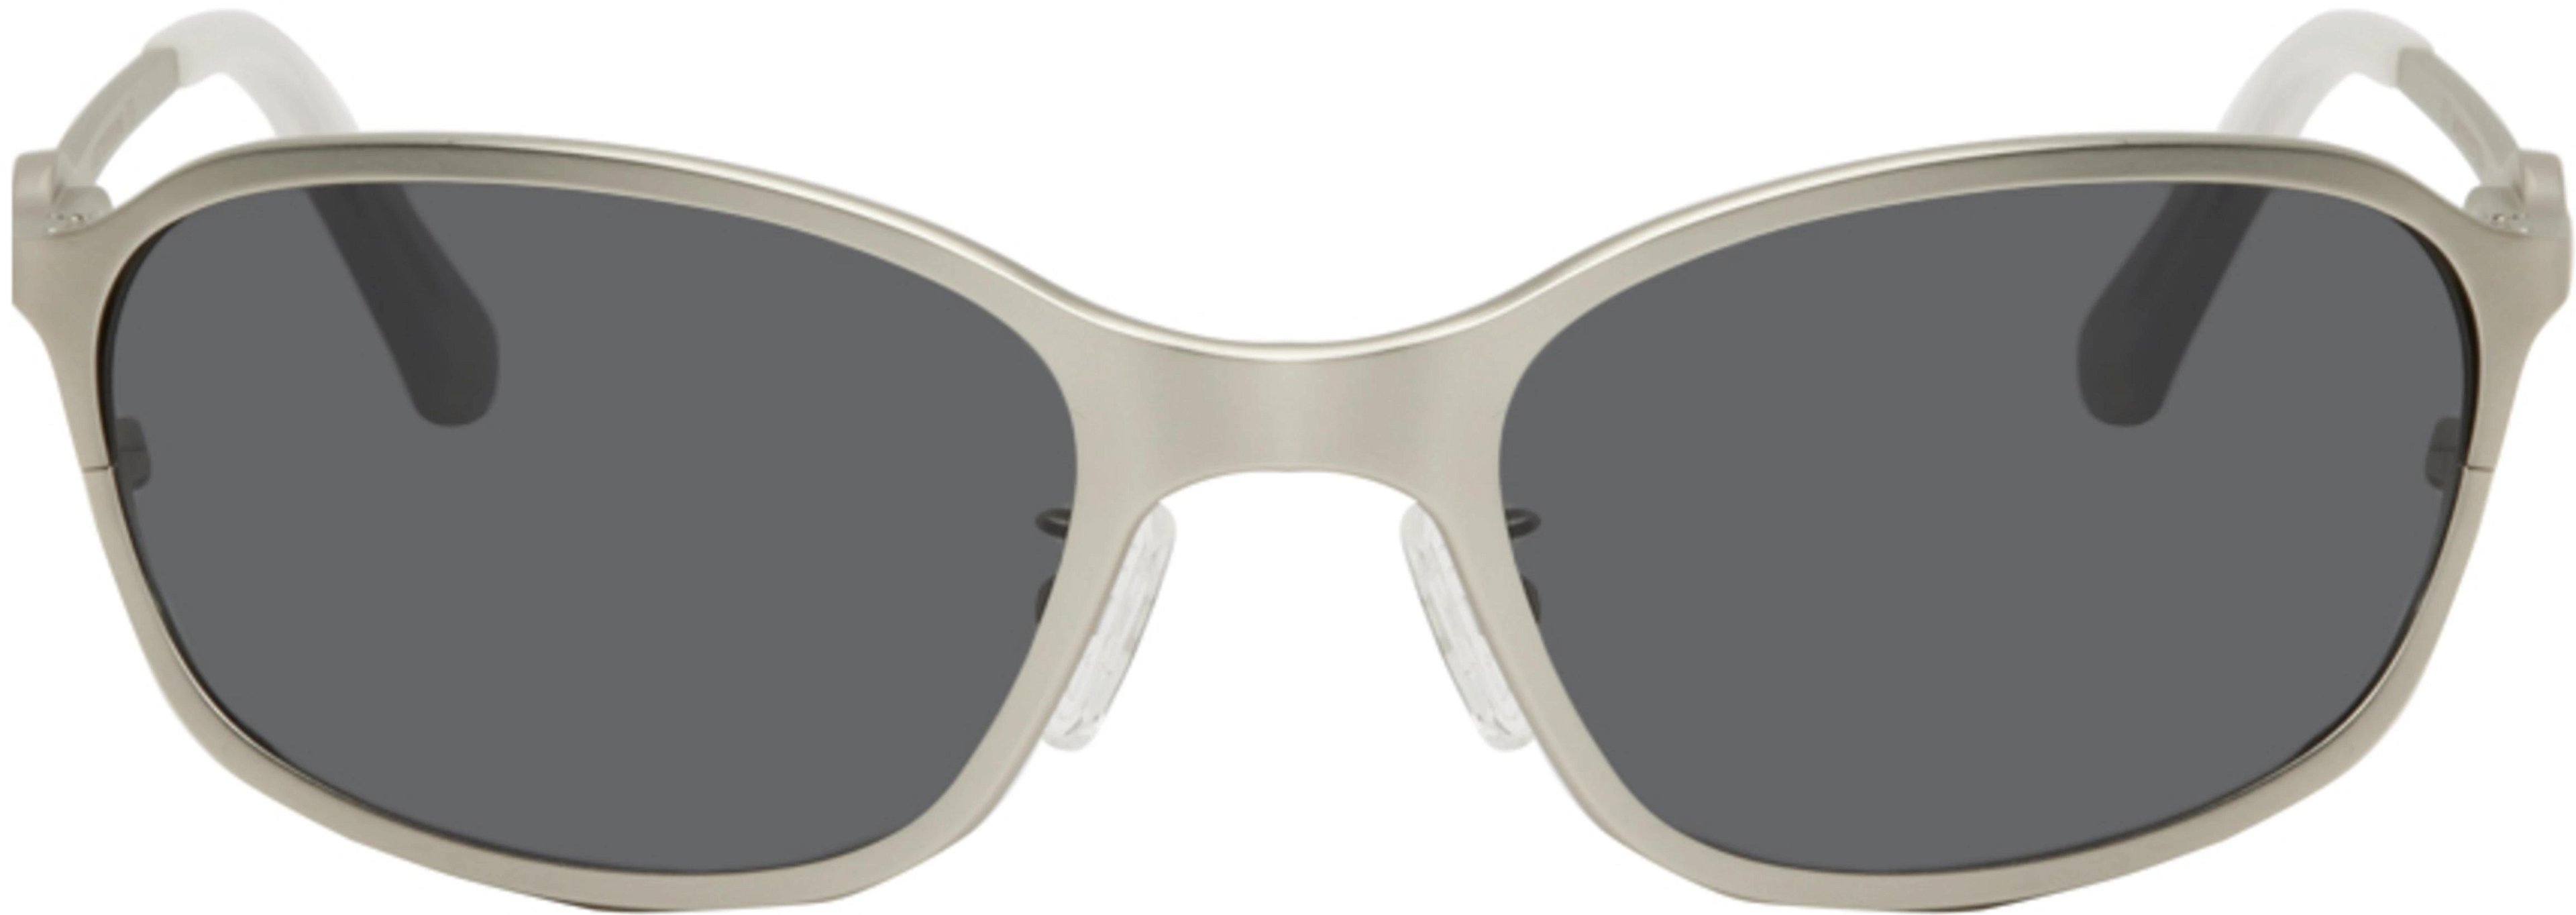 Silver Paxis Sunglasses by A BETTER FEELING